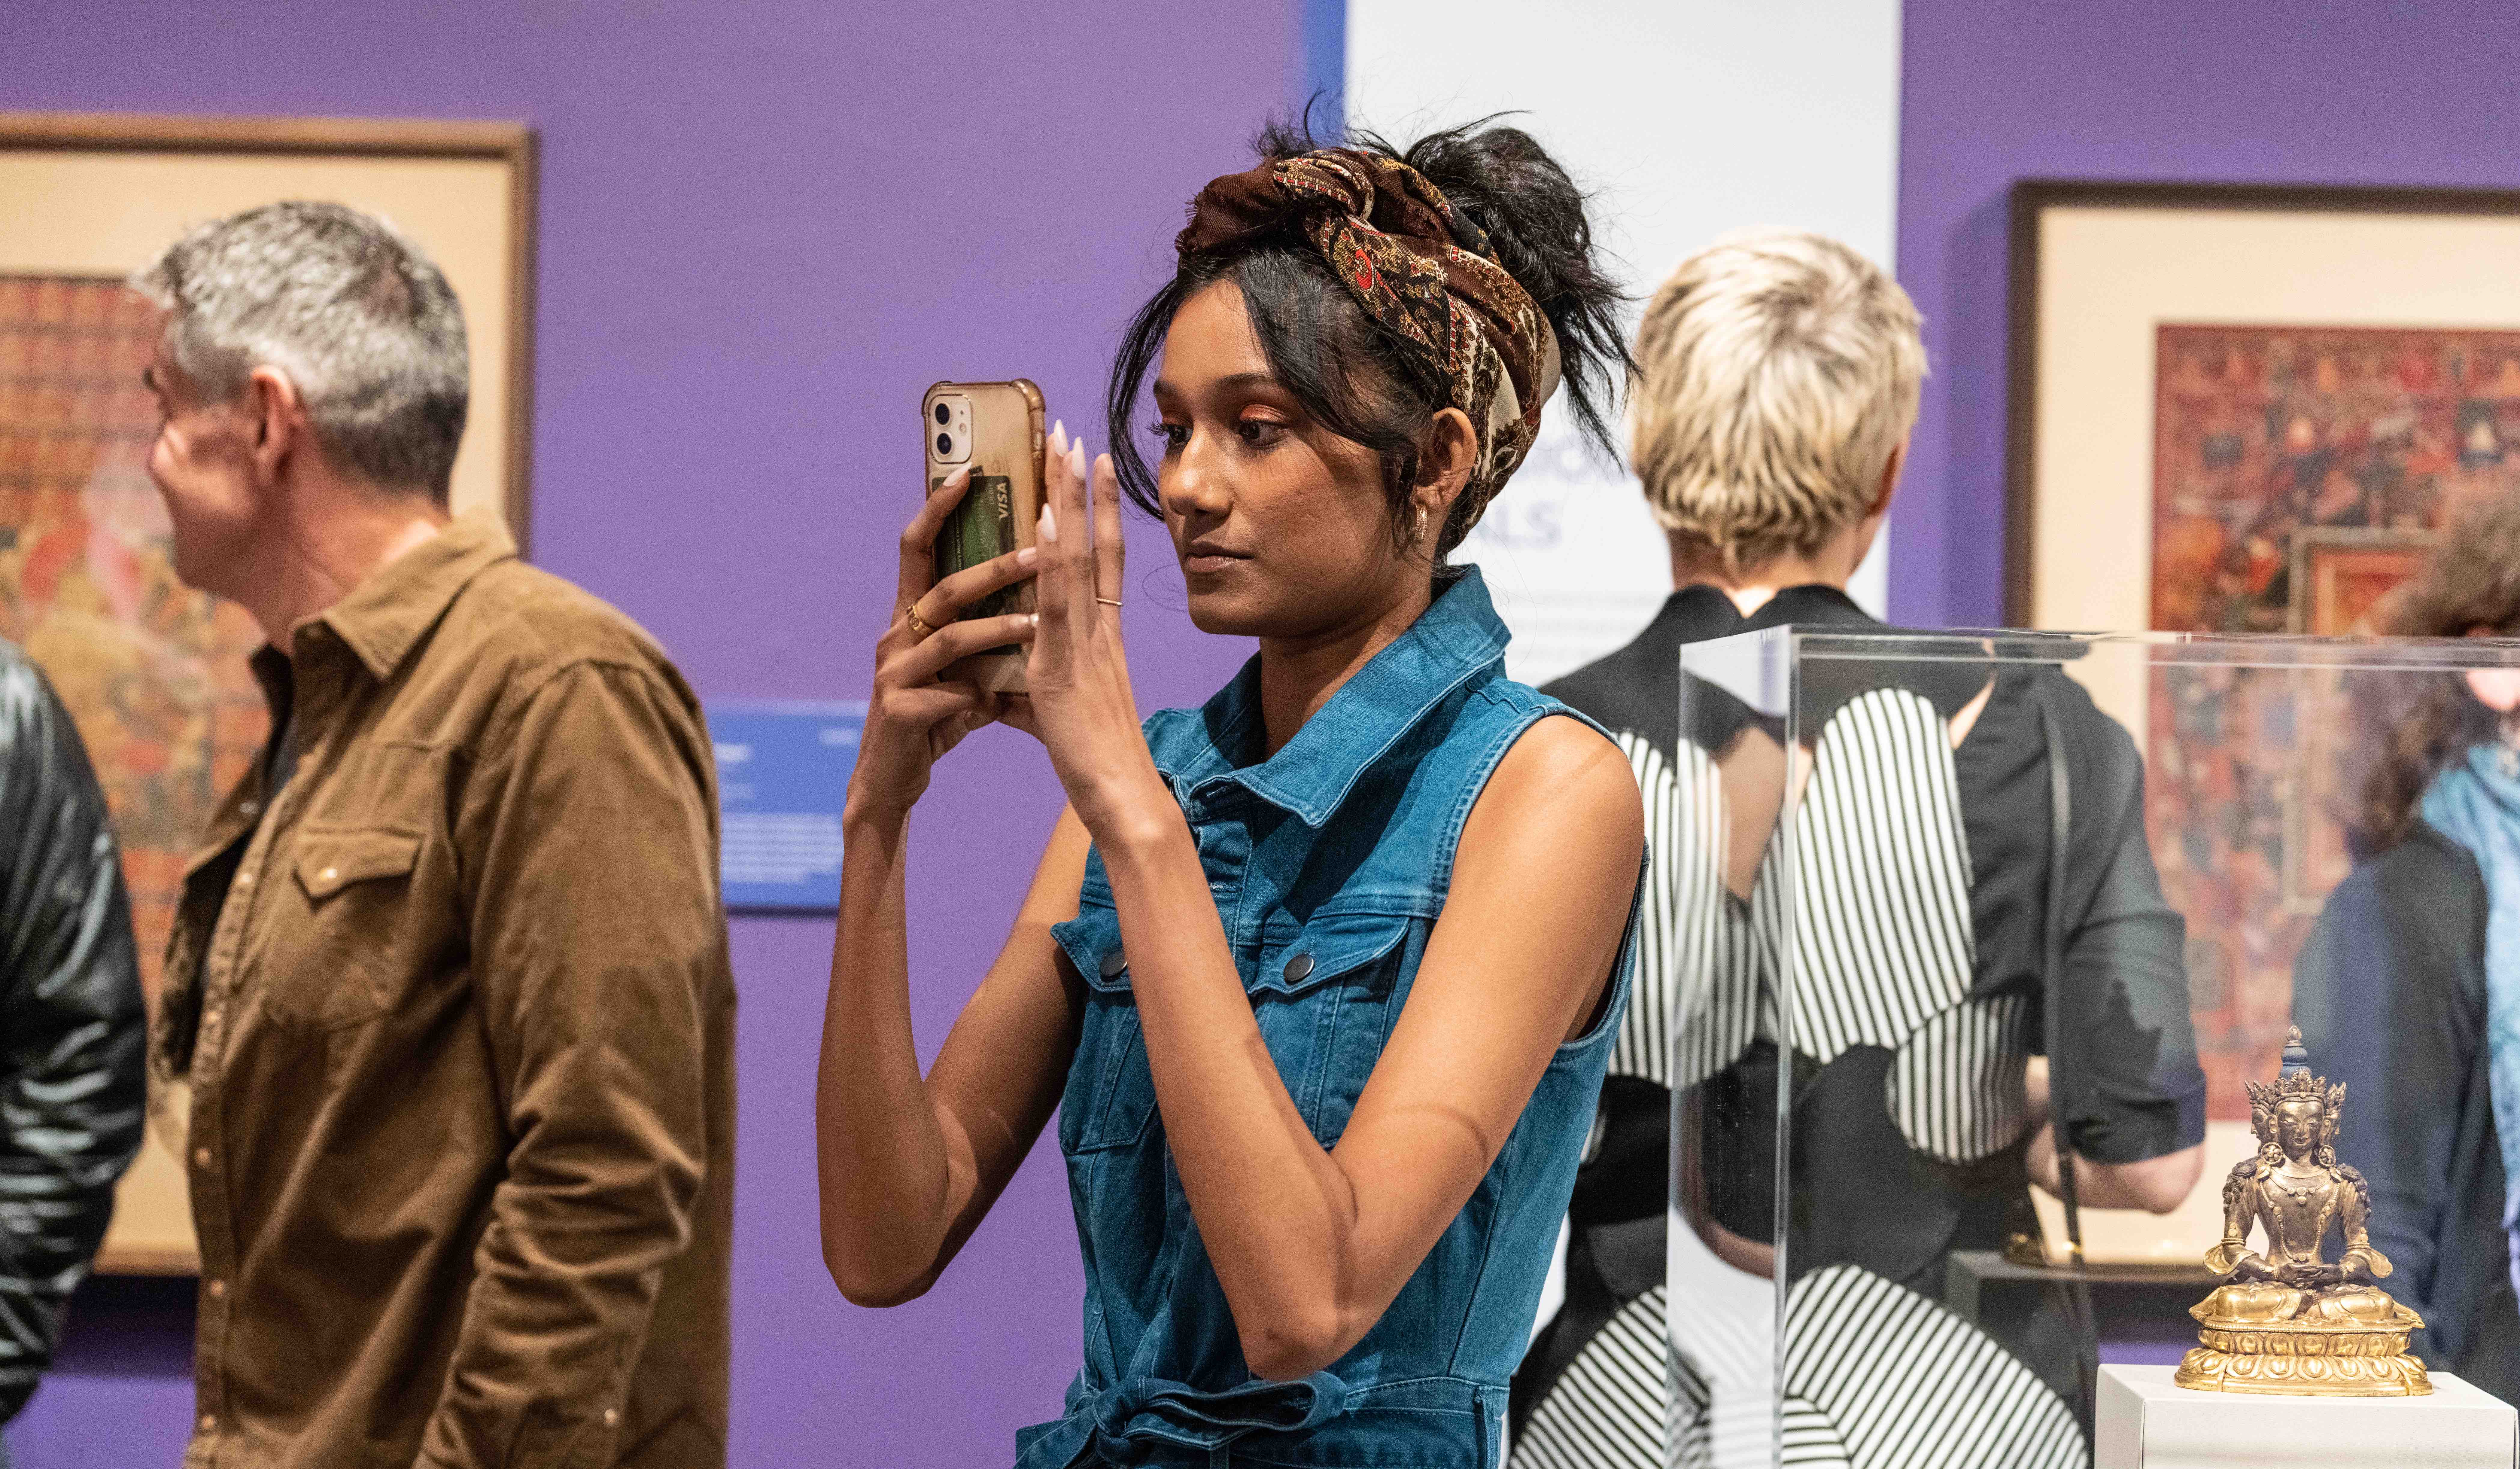 A Lehigh student takes photos during a recent exhibition at LUAG